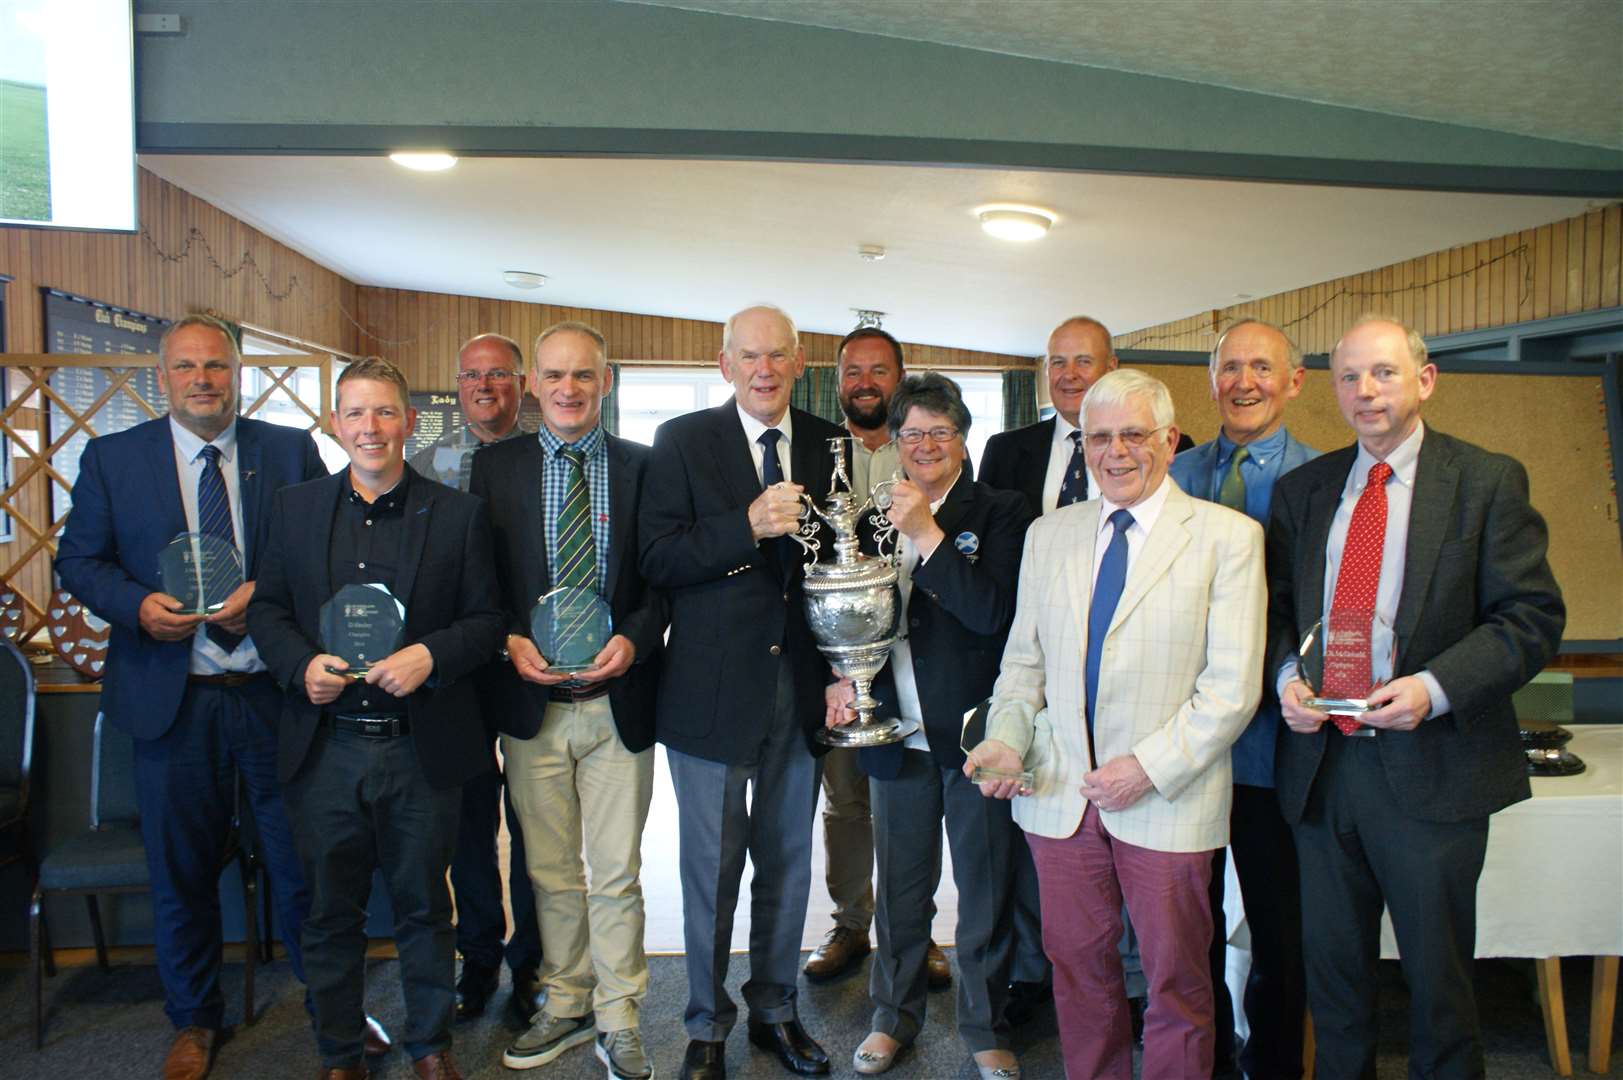 Back (L to R) – Roddy Cameron, Alexander Macdonald, David Pearson and James smith Front (L to R) – James Macbeath, Darren Hexley, Kevin Matheson, Fifteen times Champion Jim Miller holding the Championship trophy with Elizabeth Munro, George F Sutherland and Ronald R Macdonald.